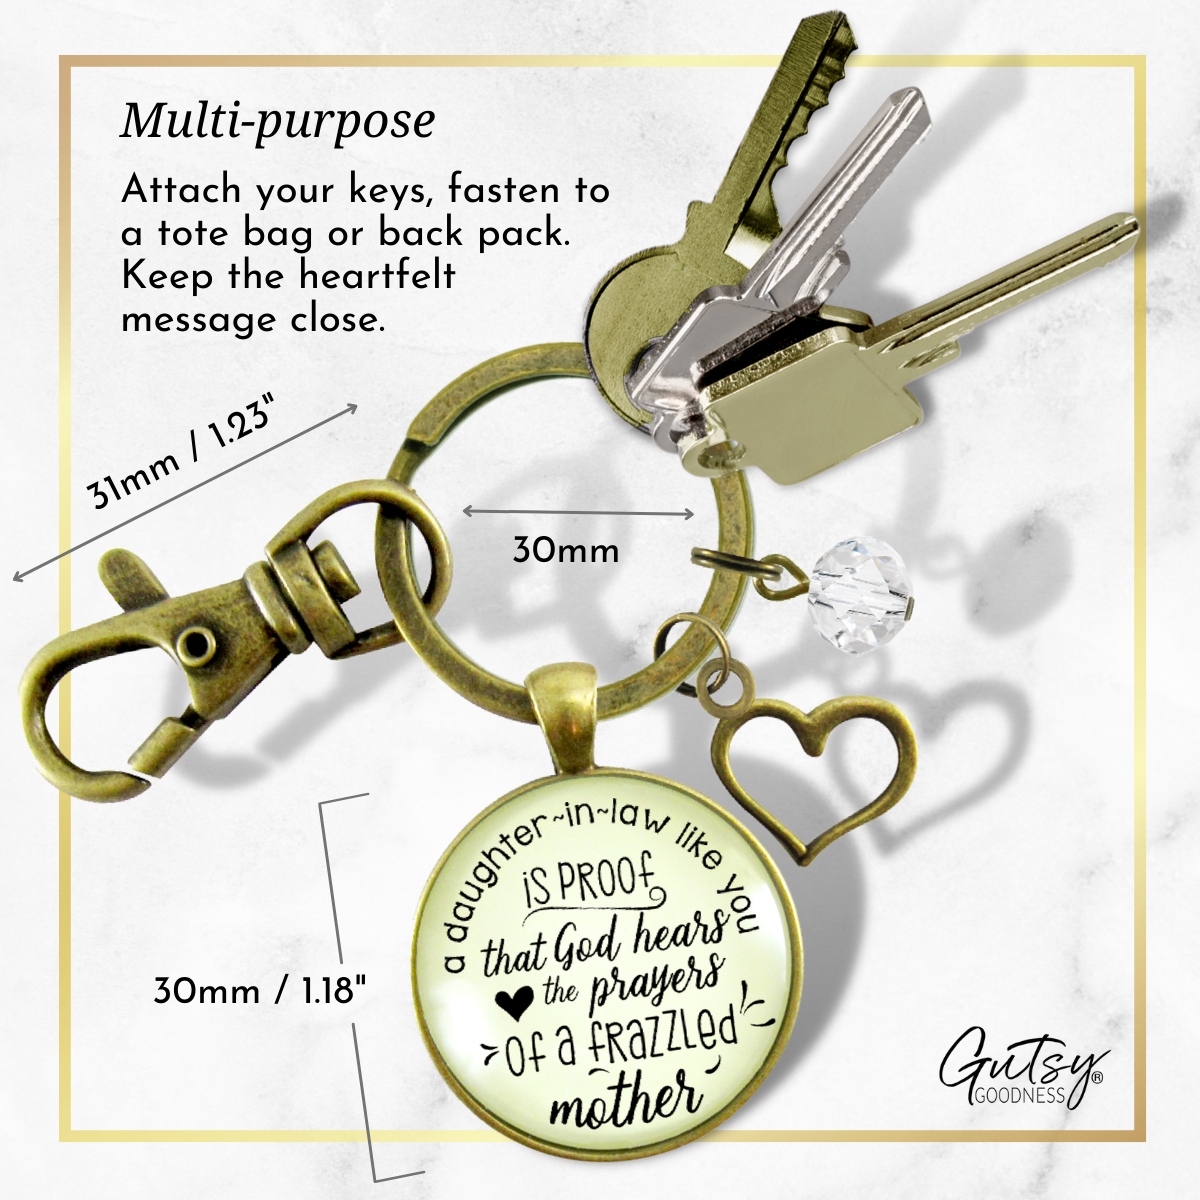 Daughter In Law Gift Keychain Proof God Hears Mother's Prayers Fun Gift Jewelry Heart Charm - Gutsy Goodness Handmade Jewelry;Daughter In Law Gift Keychain Proof God Hears Mother's Prayers Fun Gift Jewelry Heart Charm - Gutsy Goodness Handmade Jewelry Gifts